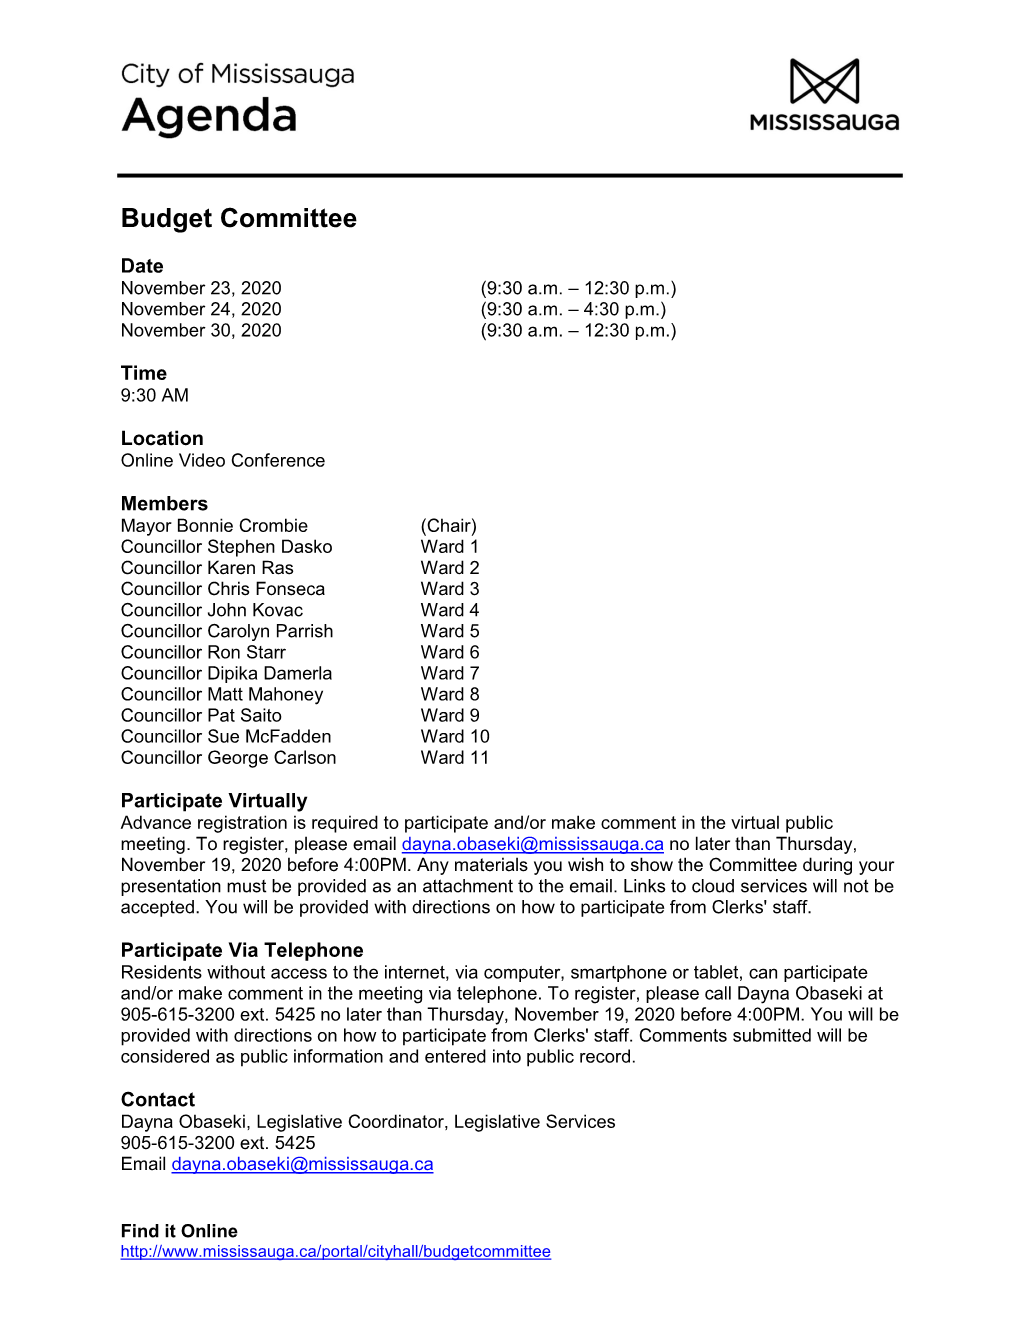 Budget Committee Escribe Agenda Package